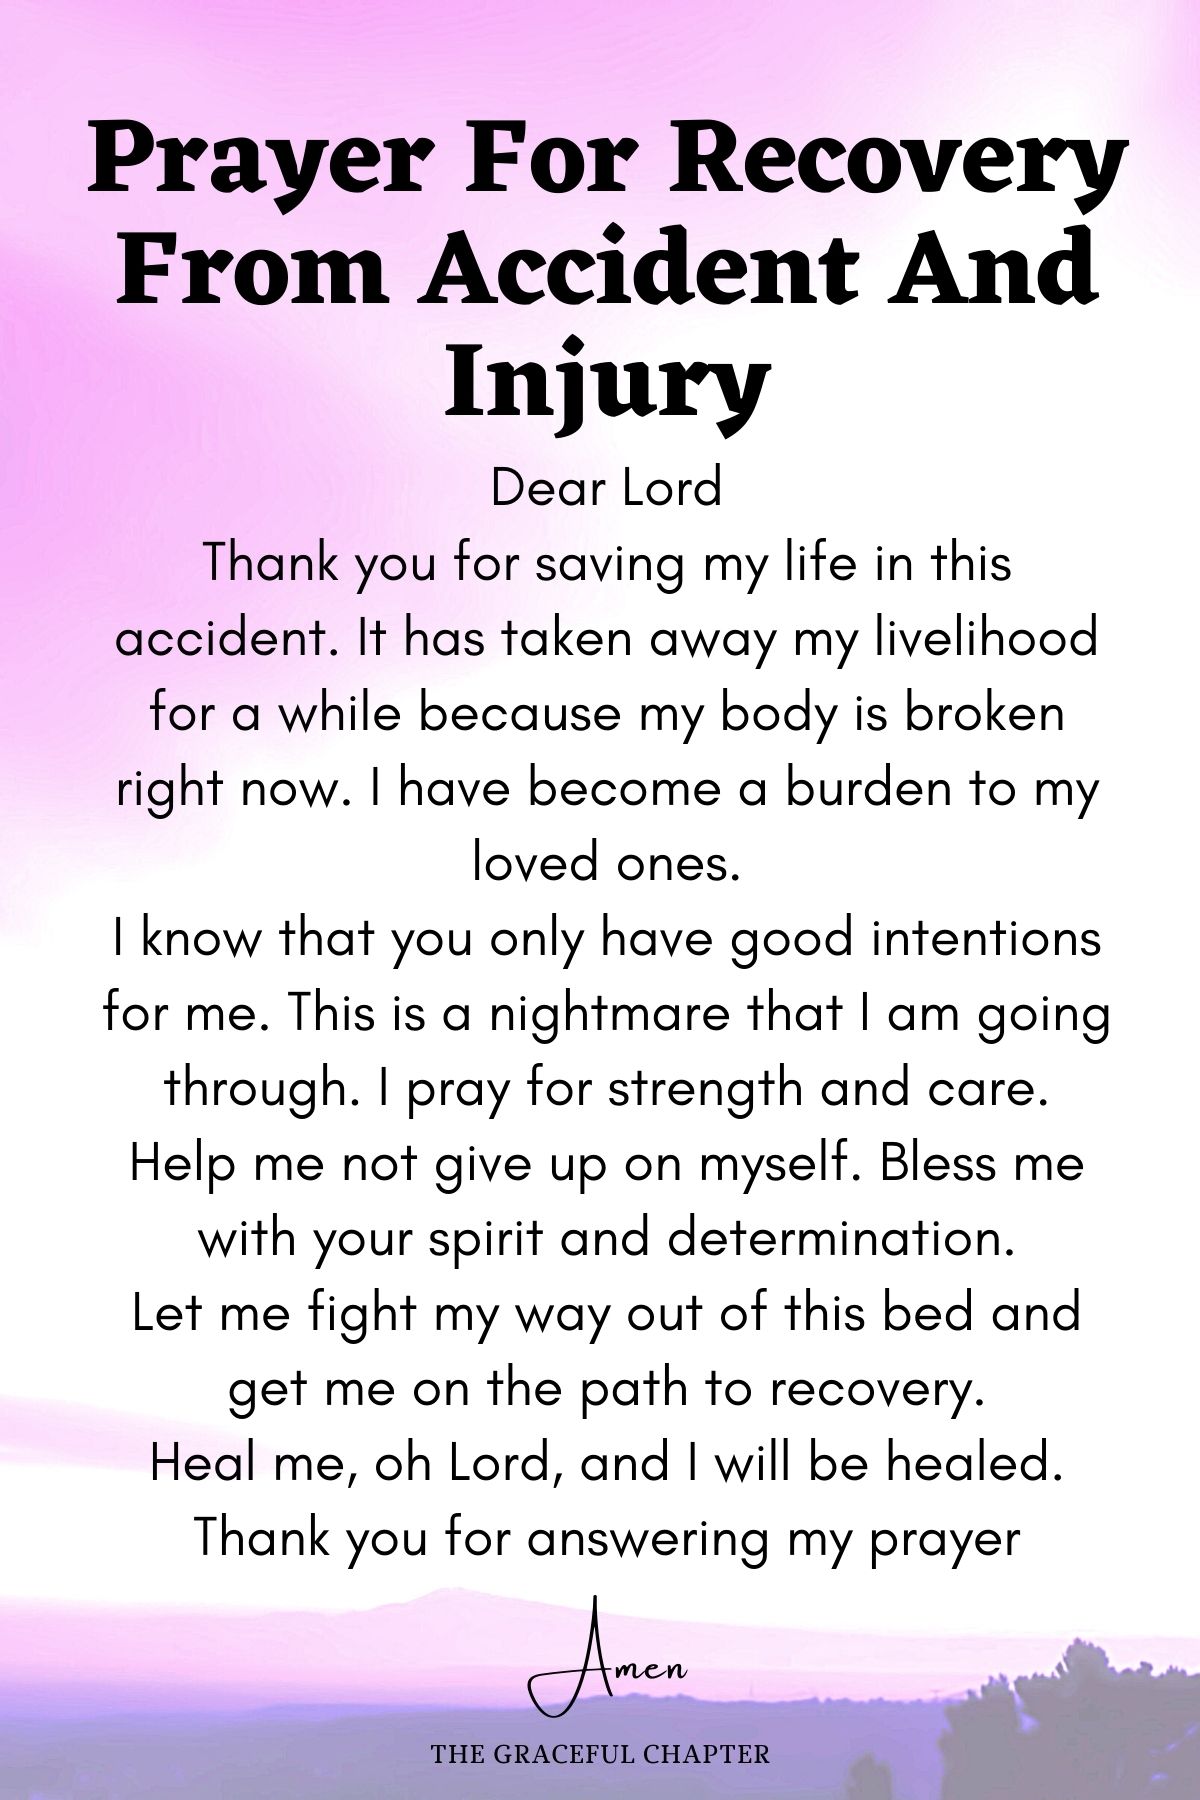 Prayer for recovery from accident and injury